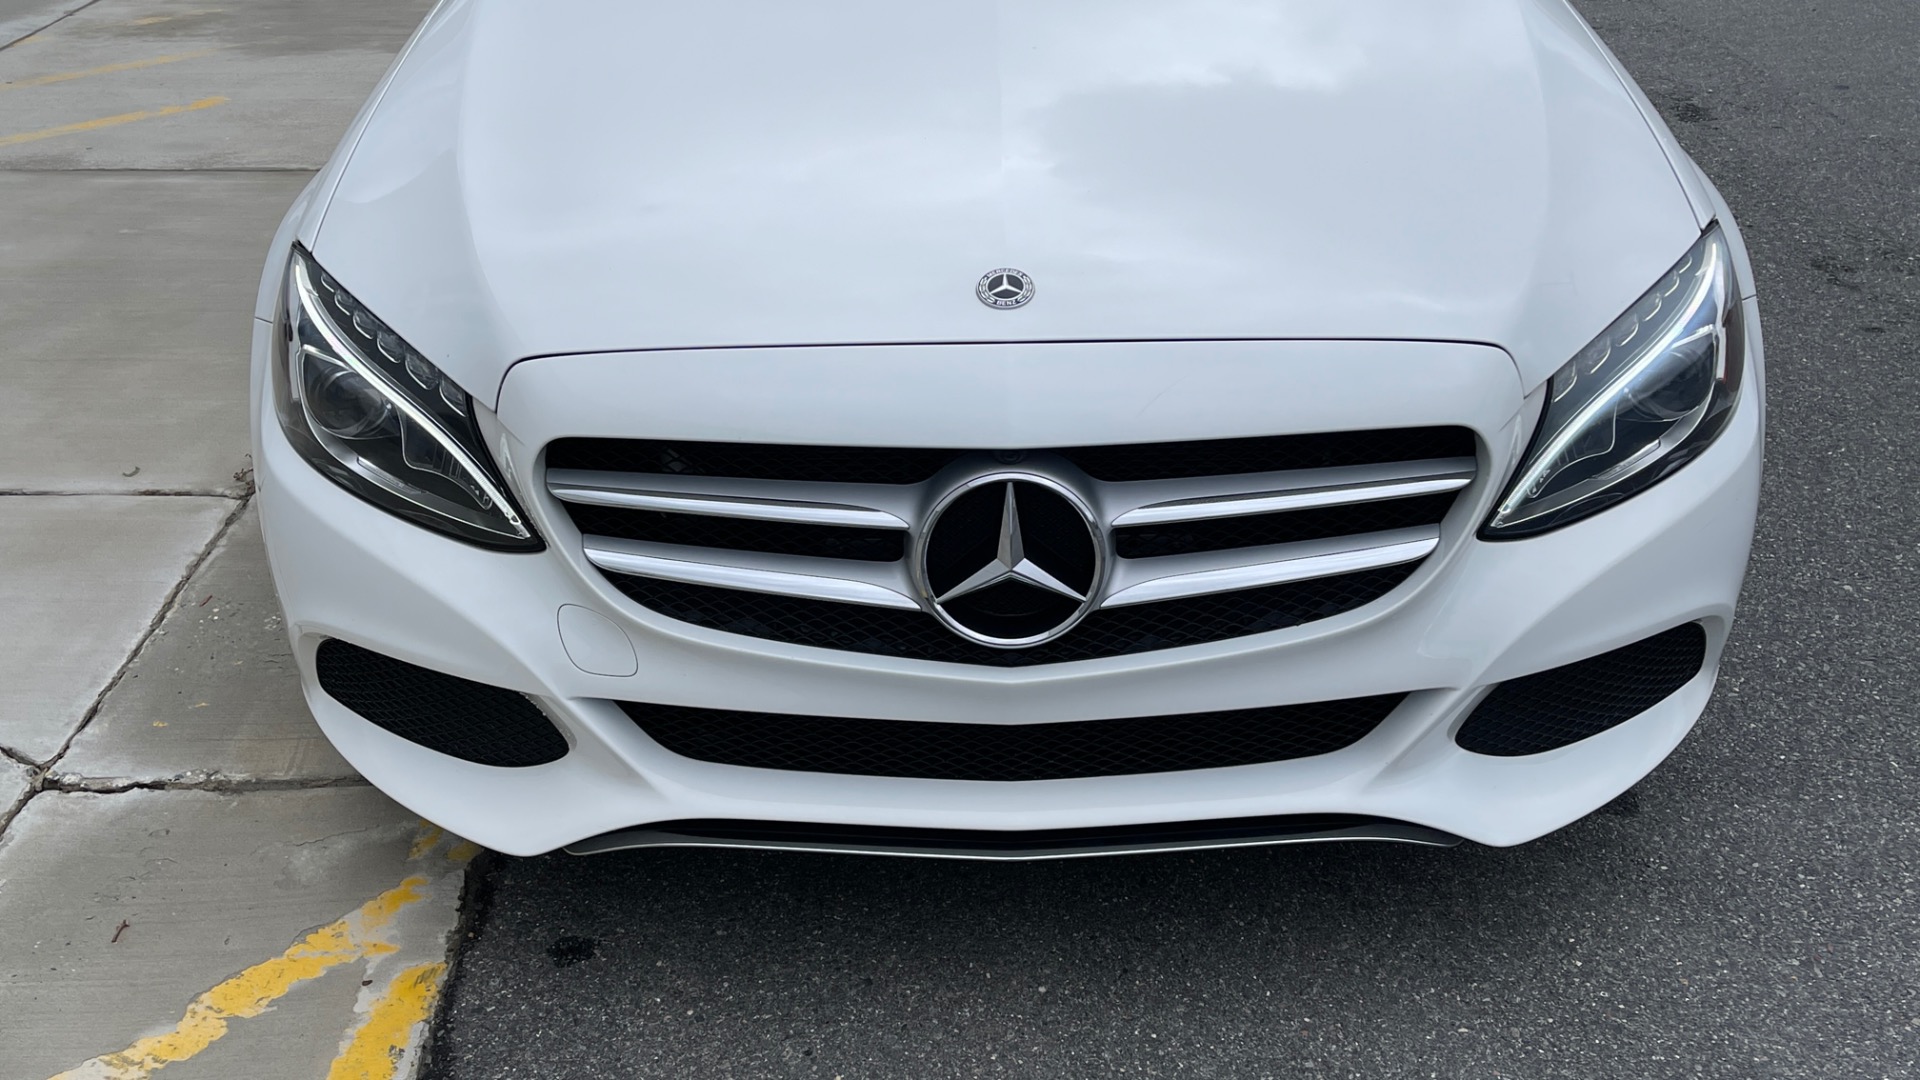 Used 2018 Mercedes-Benz C-CLASS C 300 PREMIUM / NAV / HTD STS / APPLE CARPLAY / REARVIEW for sale Sold at Formula Imports in Charlotte NC 28227 9